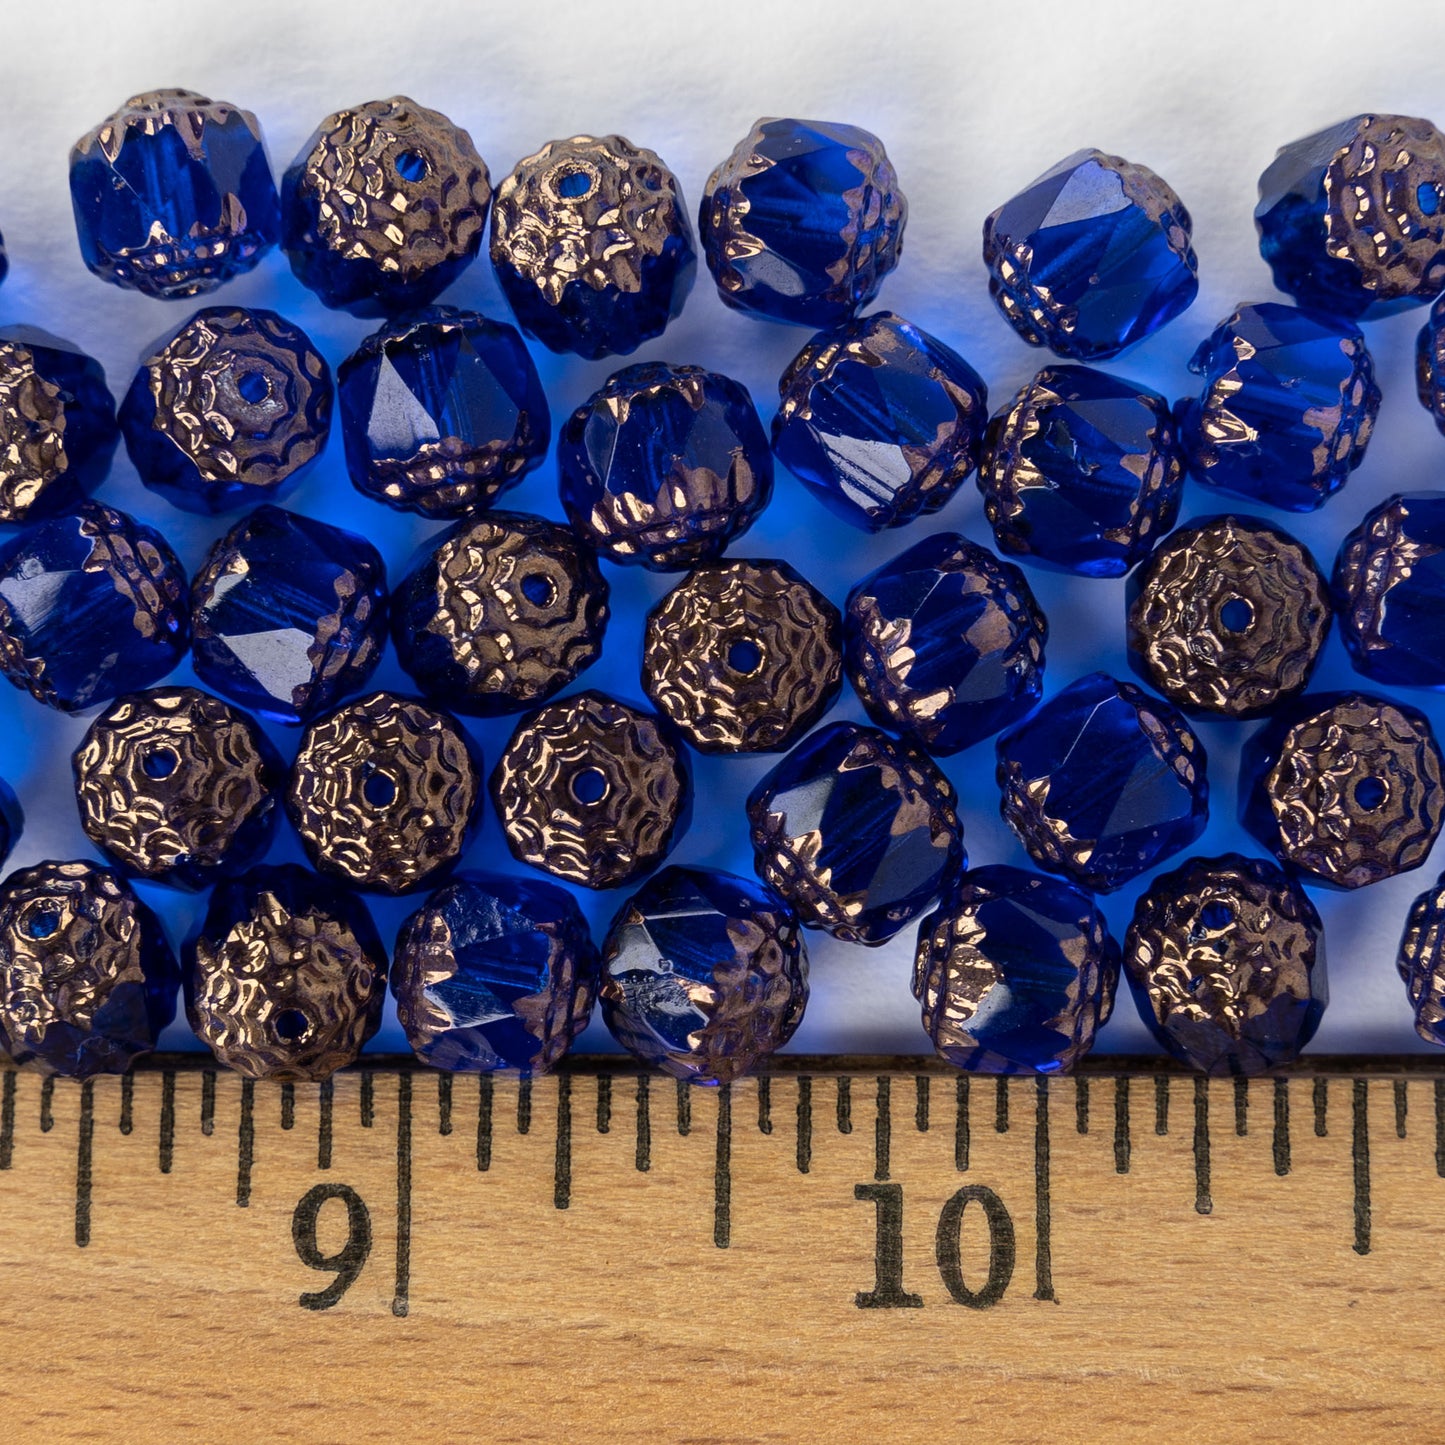 8mm Cathedral Tube - Capri Blue with Bronze - 20 Beads